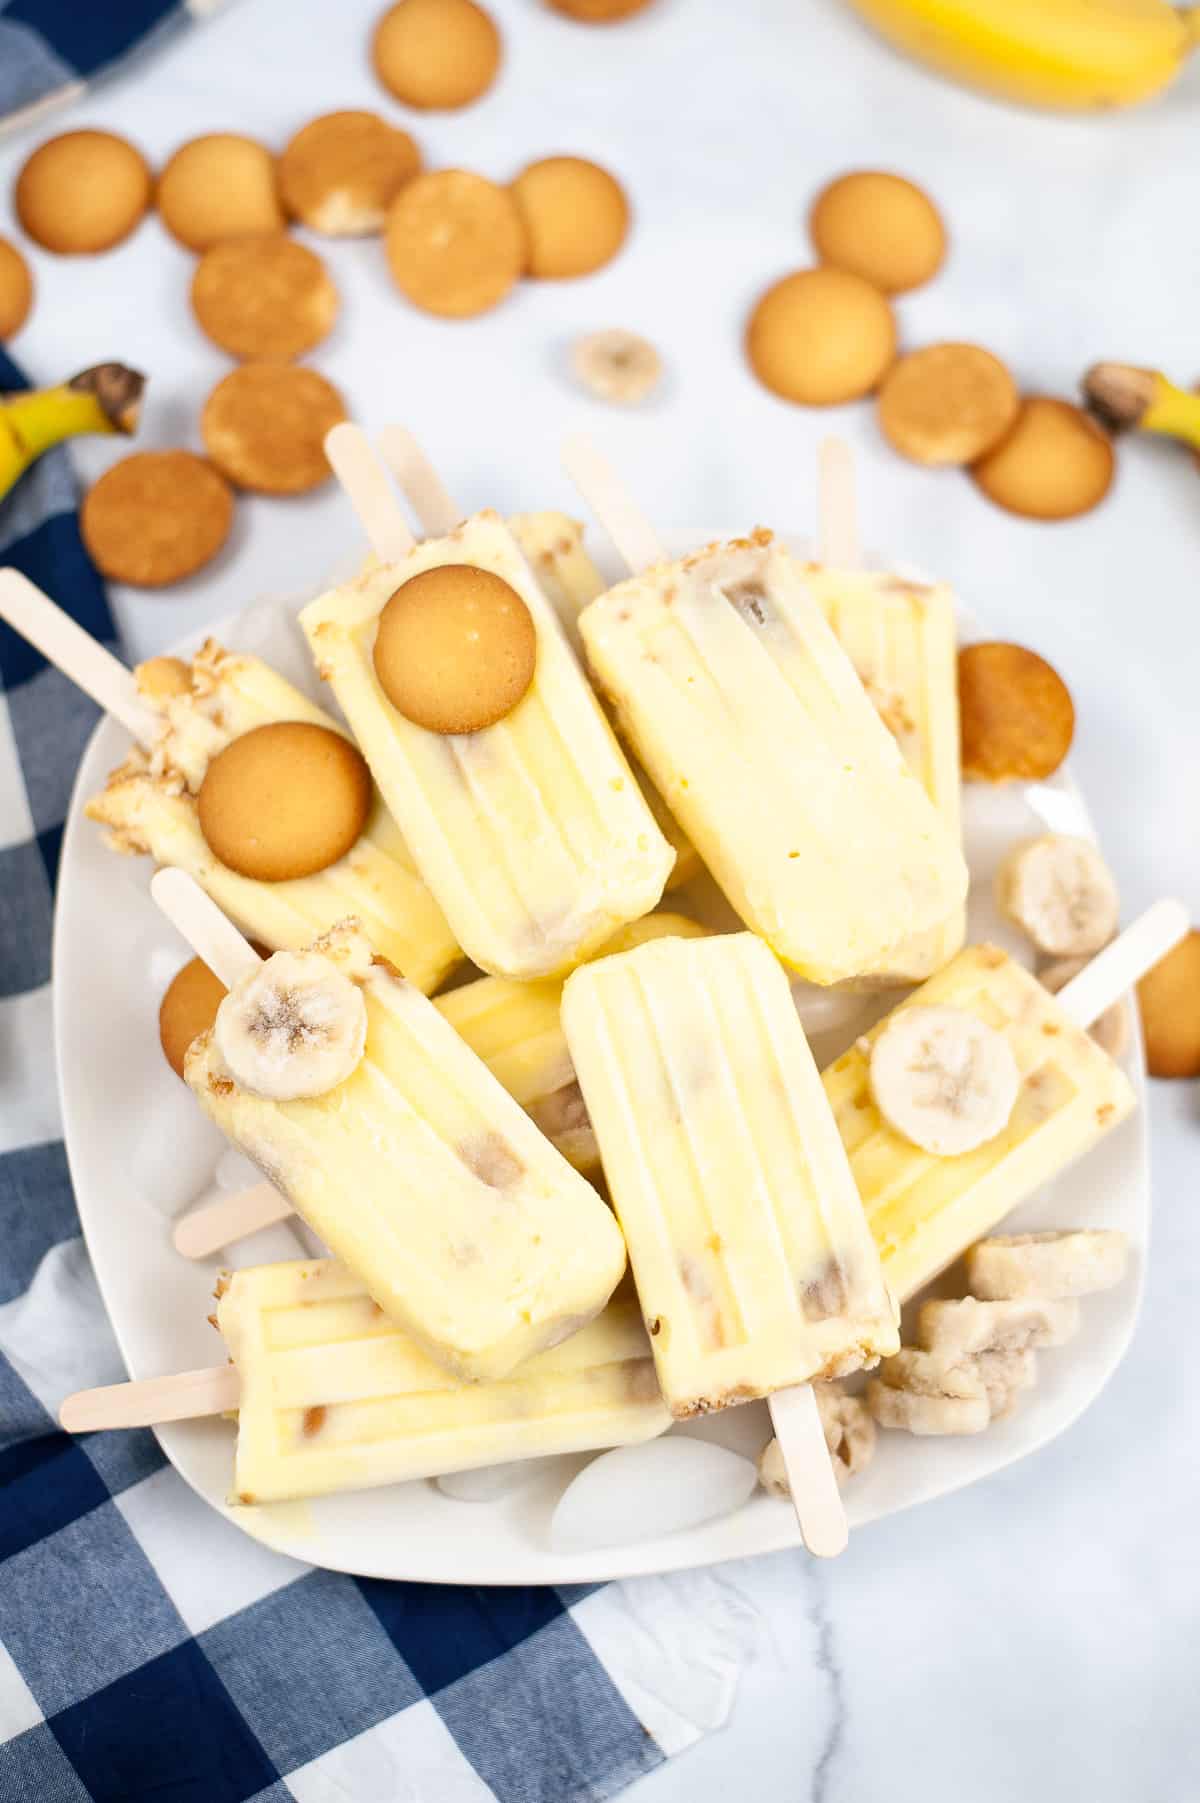 Banana popsicles piled on a platter with nilla wafers and frozen banana slices